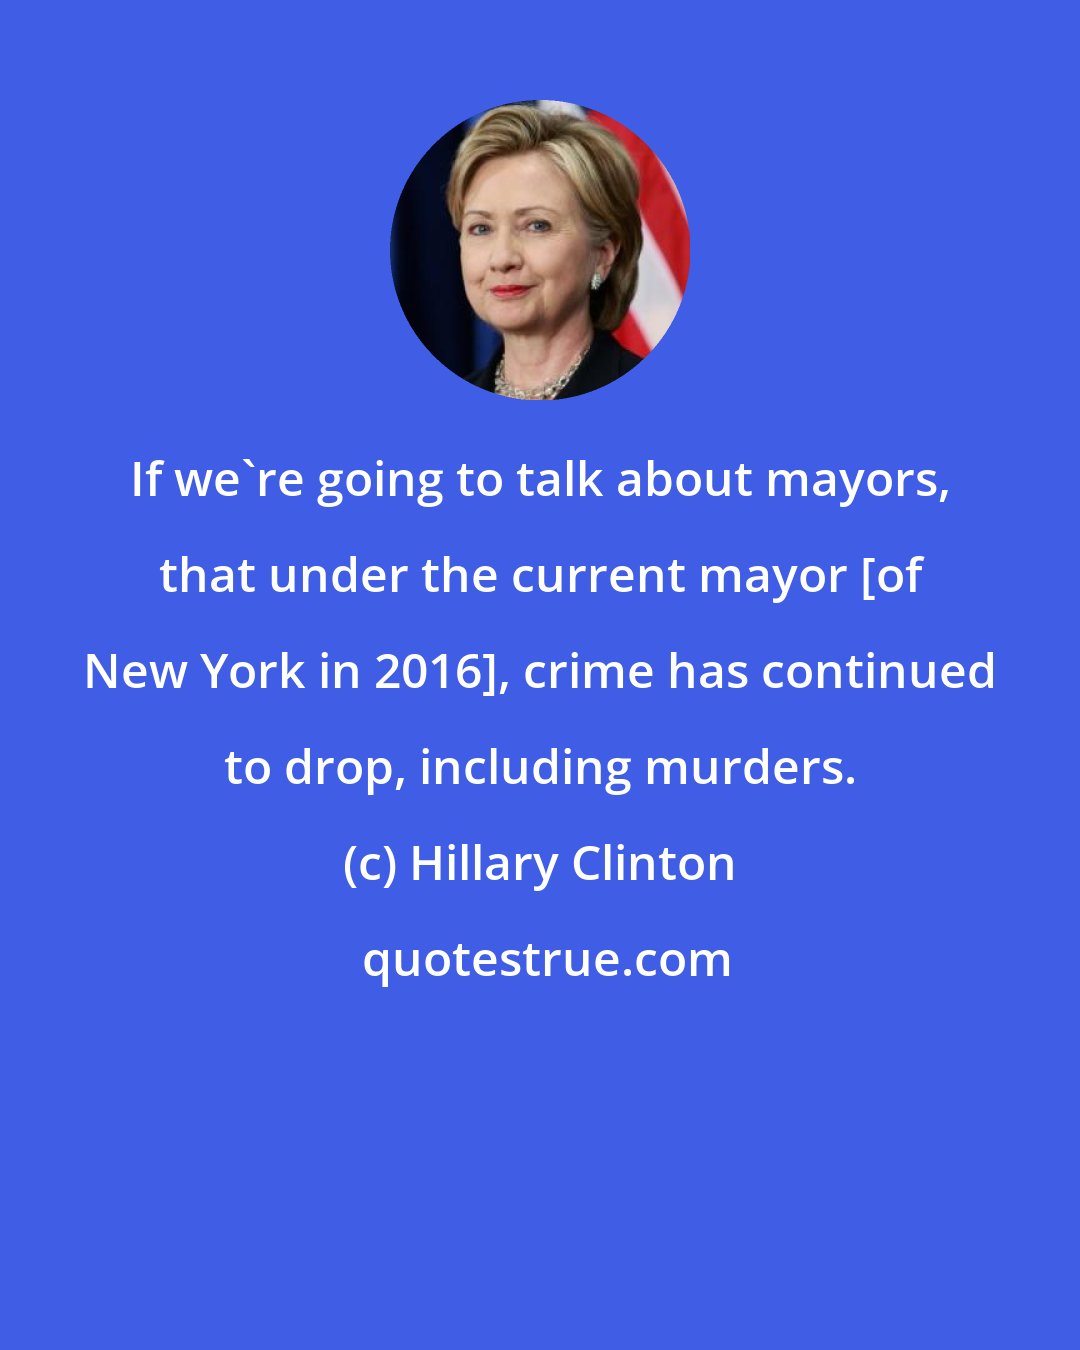 Hillary Clinton: If we're going to talk about mayors, that under the current mayor [of New York in 2016], crime has continued to drop, including murders.